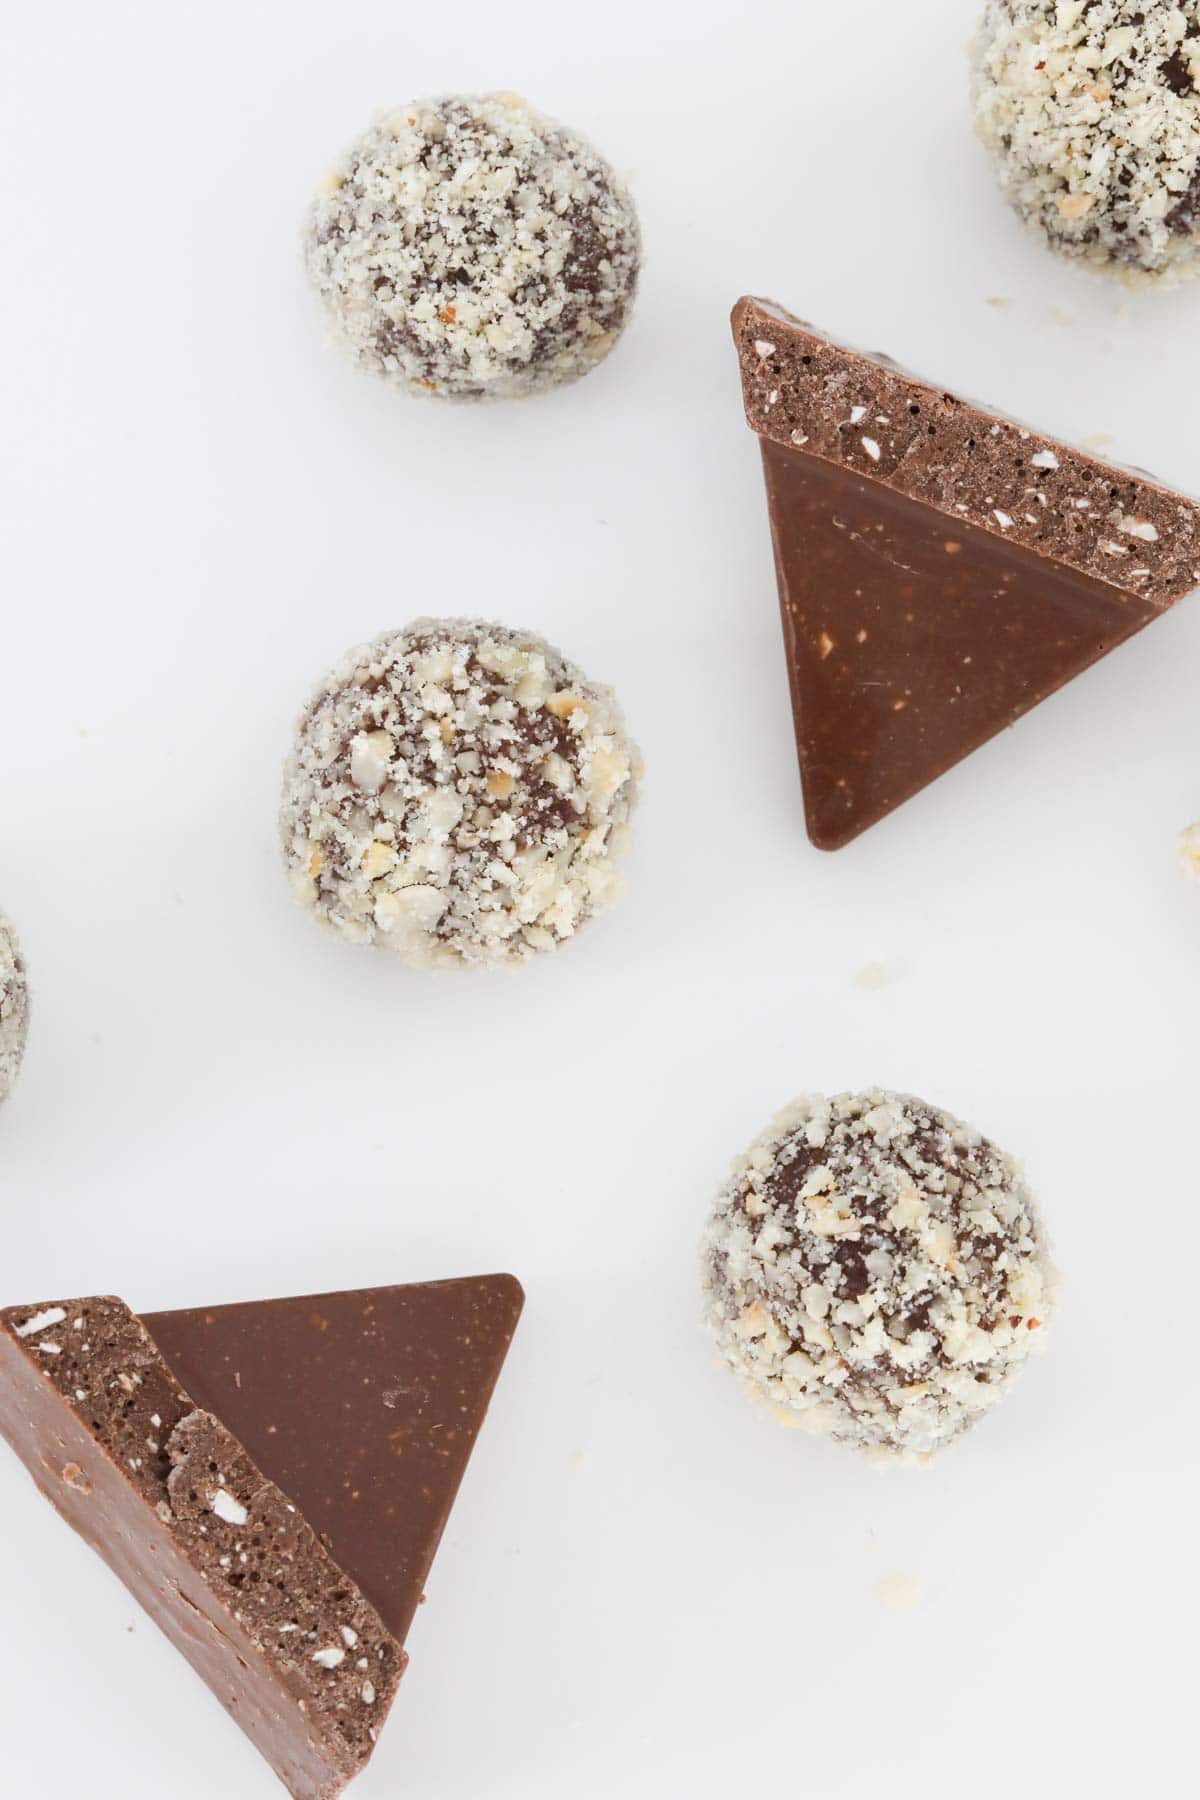 Chocolate balls coated in crushed hazelnuts and triangles of Toblerone chocolate on a white bench.